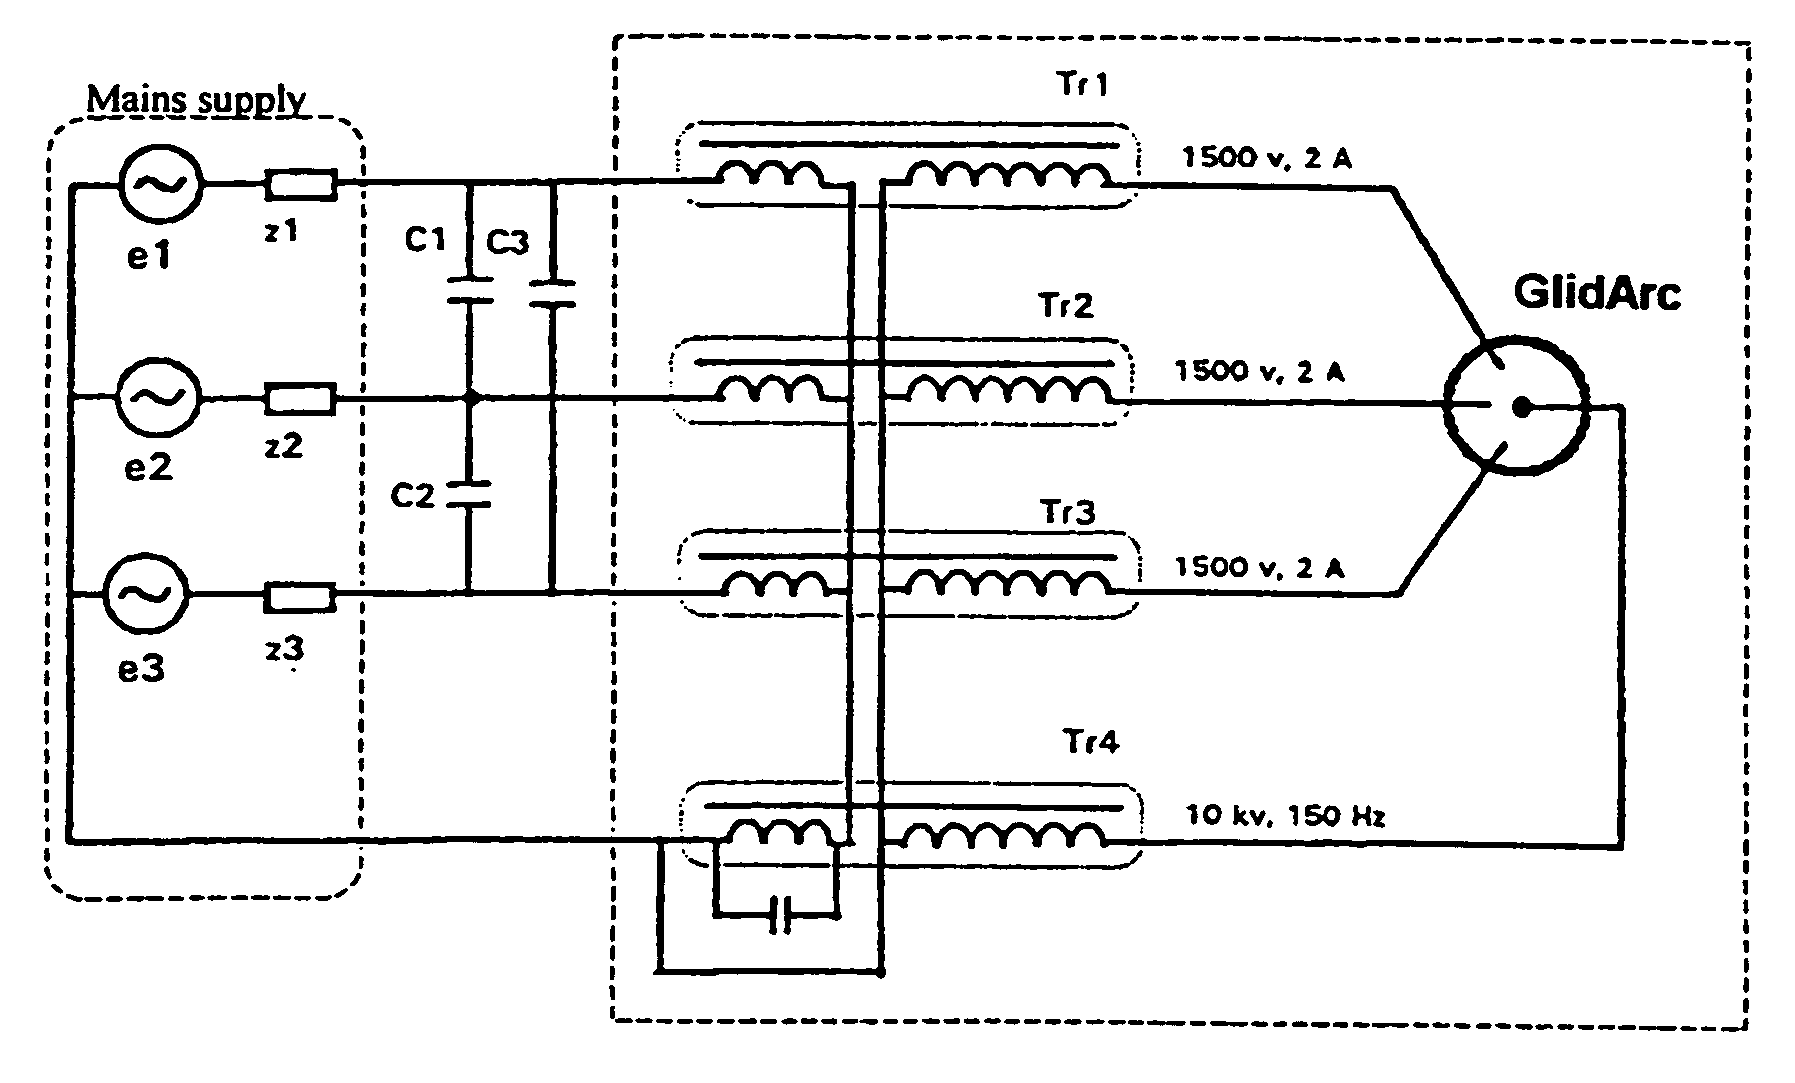 Systems and method for ignition and reignition of unstable electrical discharges